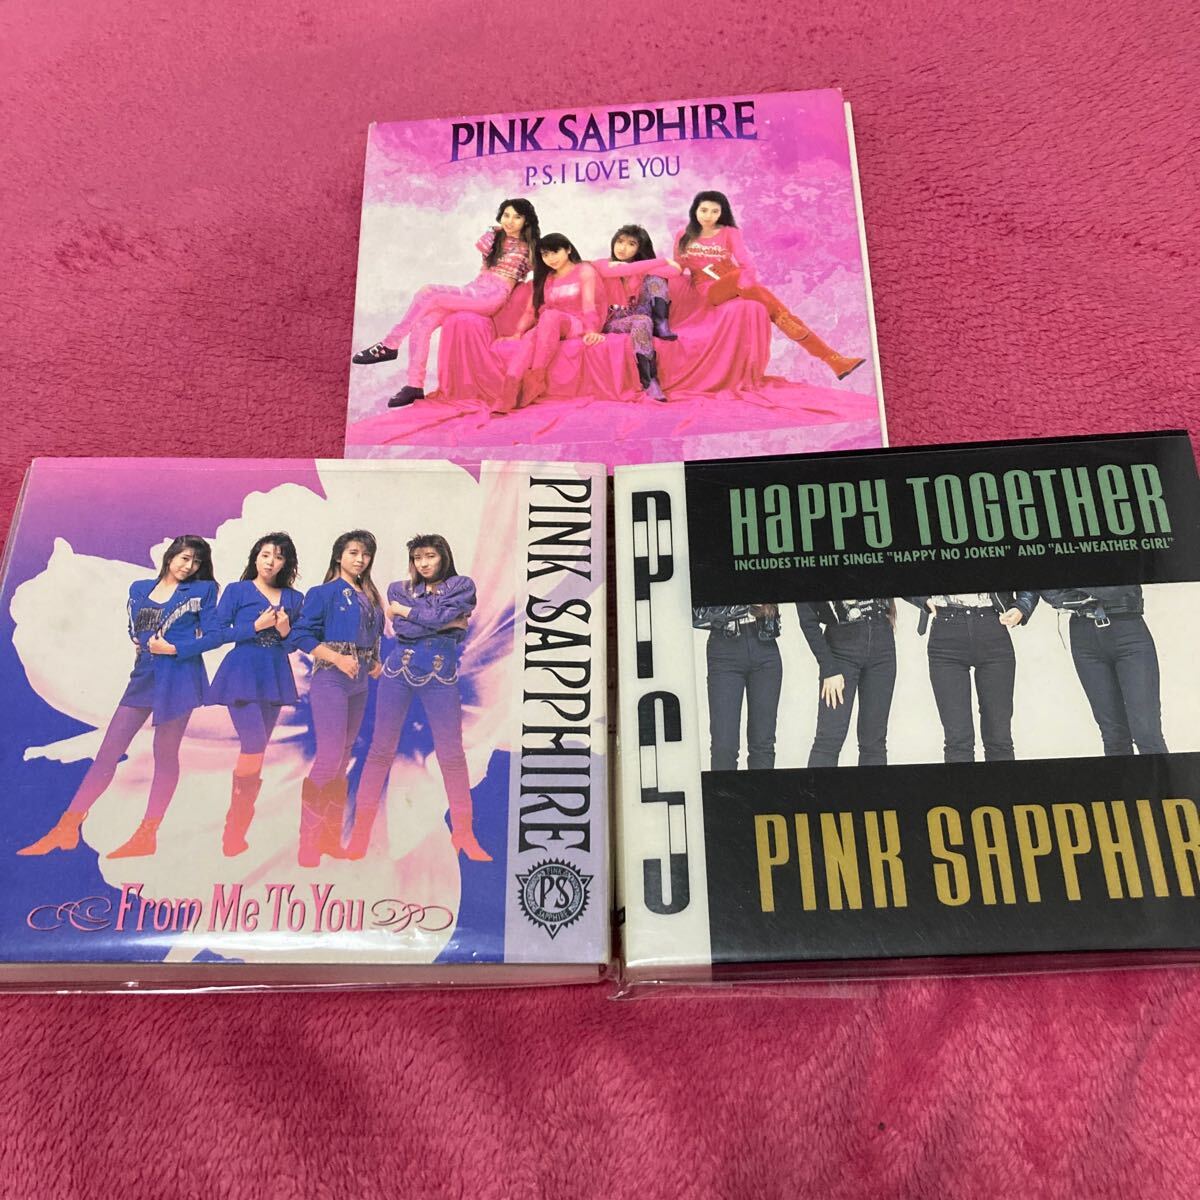 ＰＩＮＫ ＳＡＰＰＨＩＲＥ／ Ｐ．Ｓ．ＩＬＯＶＥ・From Me To You・Happy Together 初回盤3枚セット_画像1